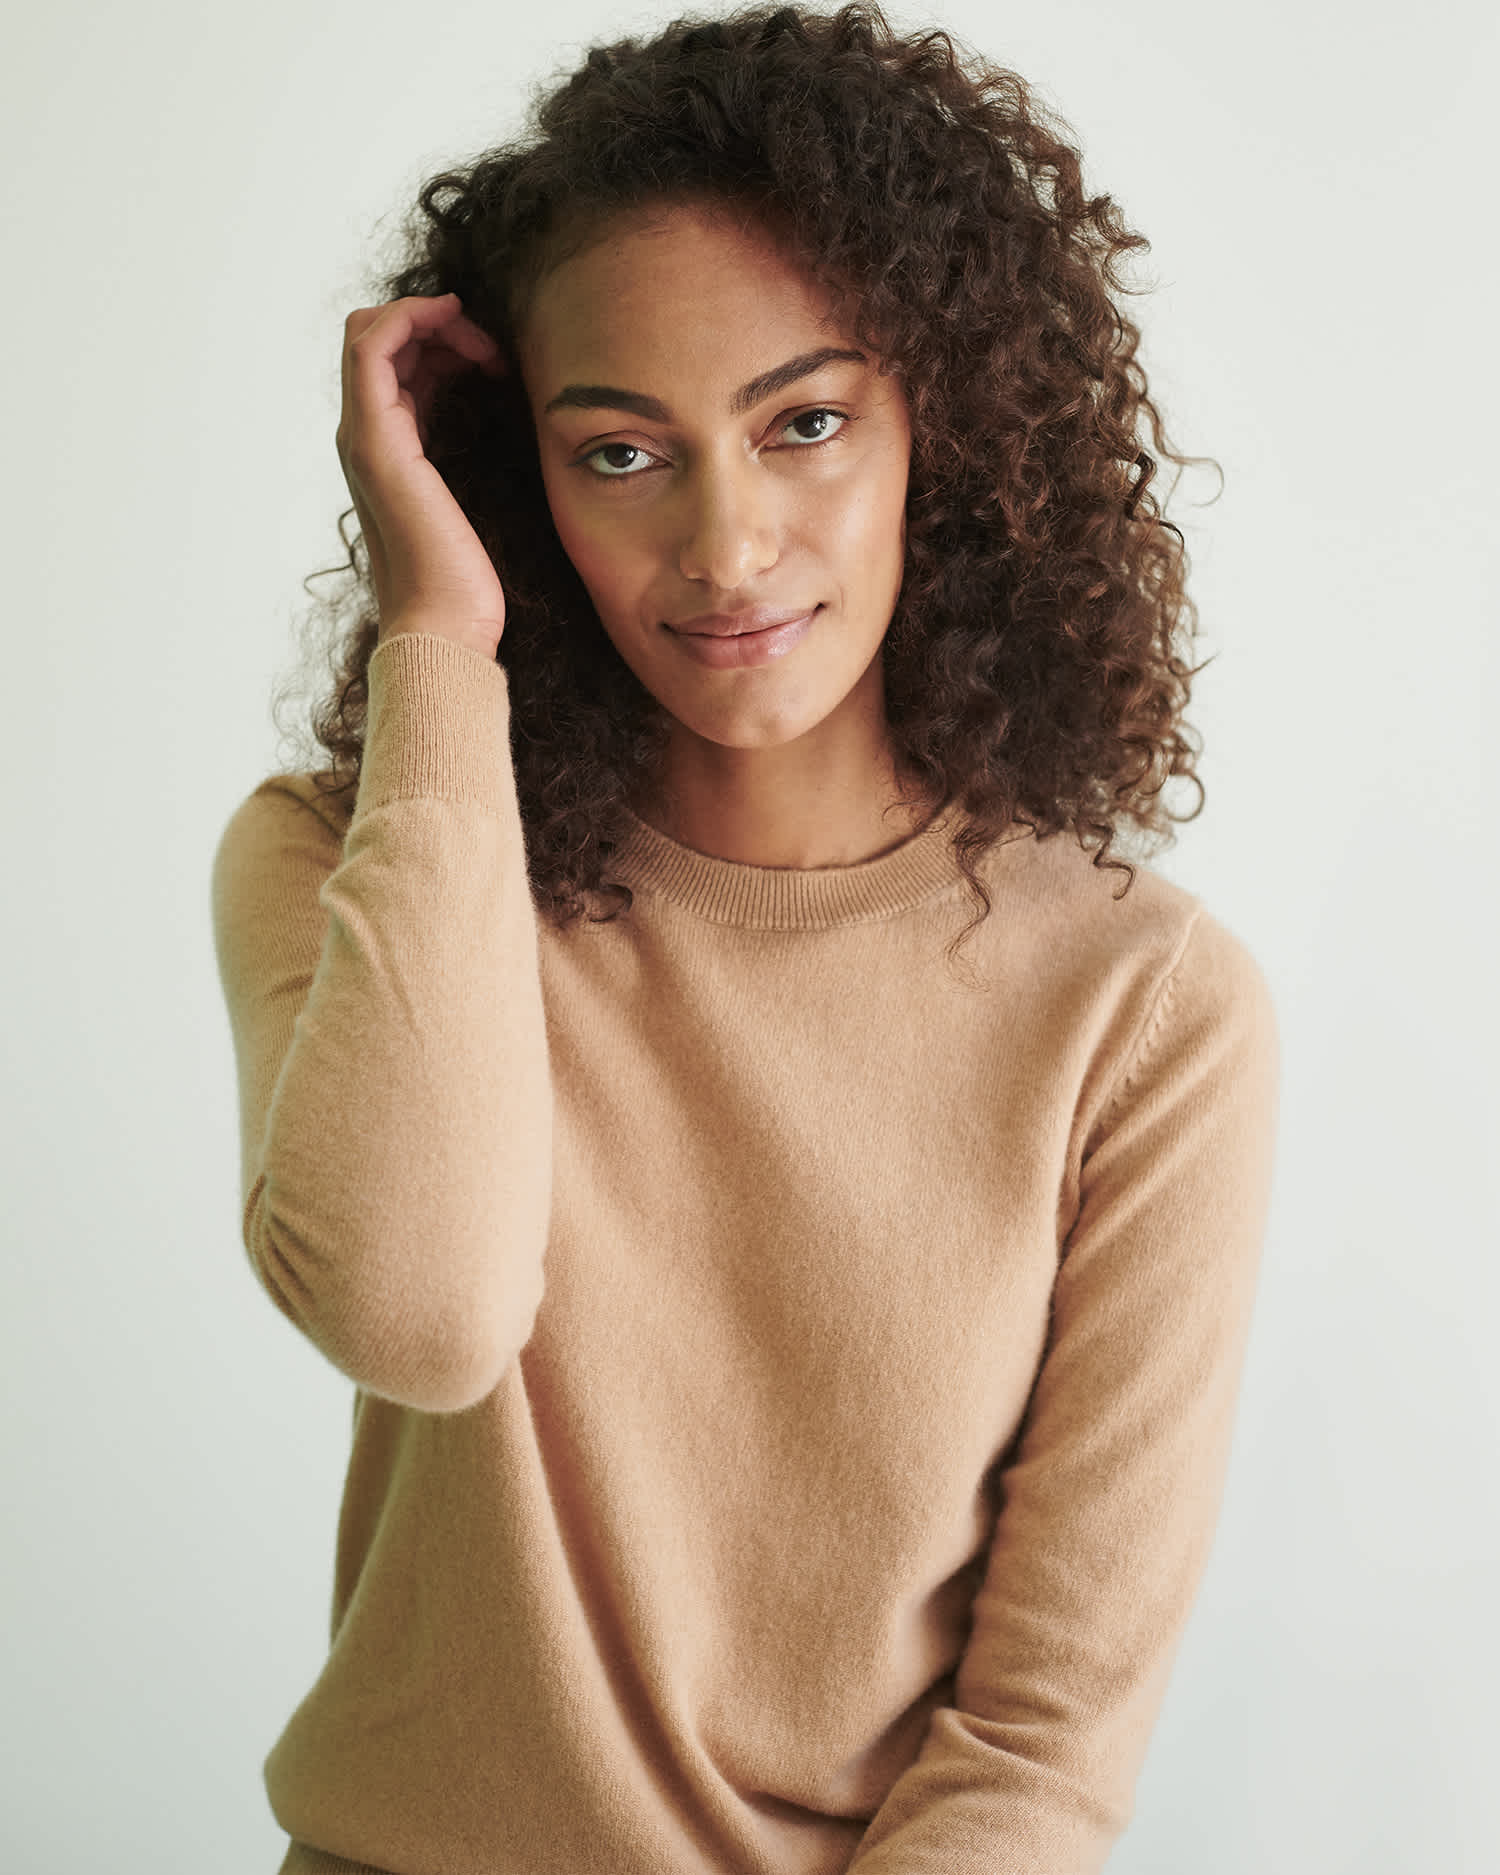 Woman wearing camel cashmere sweater smiling